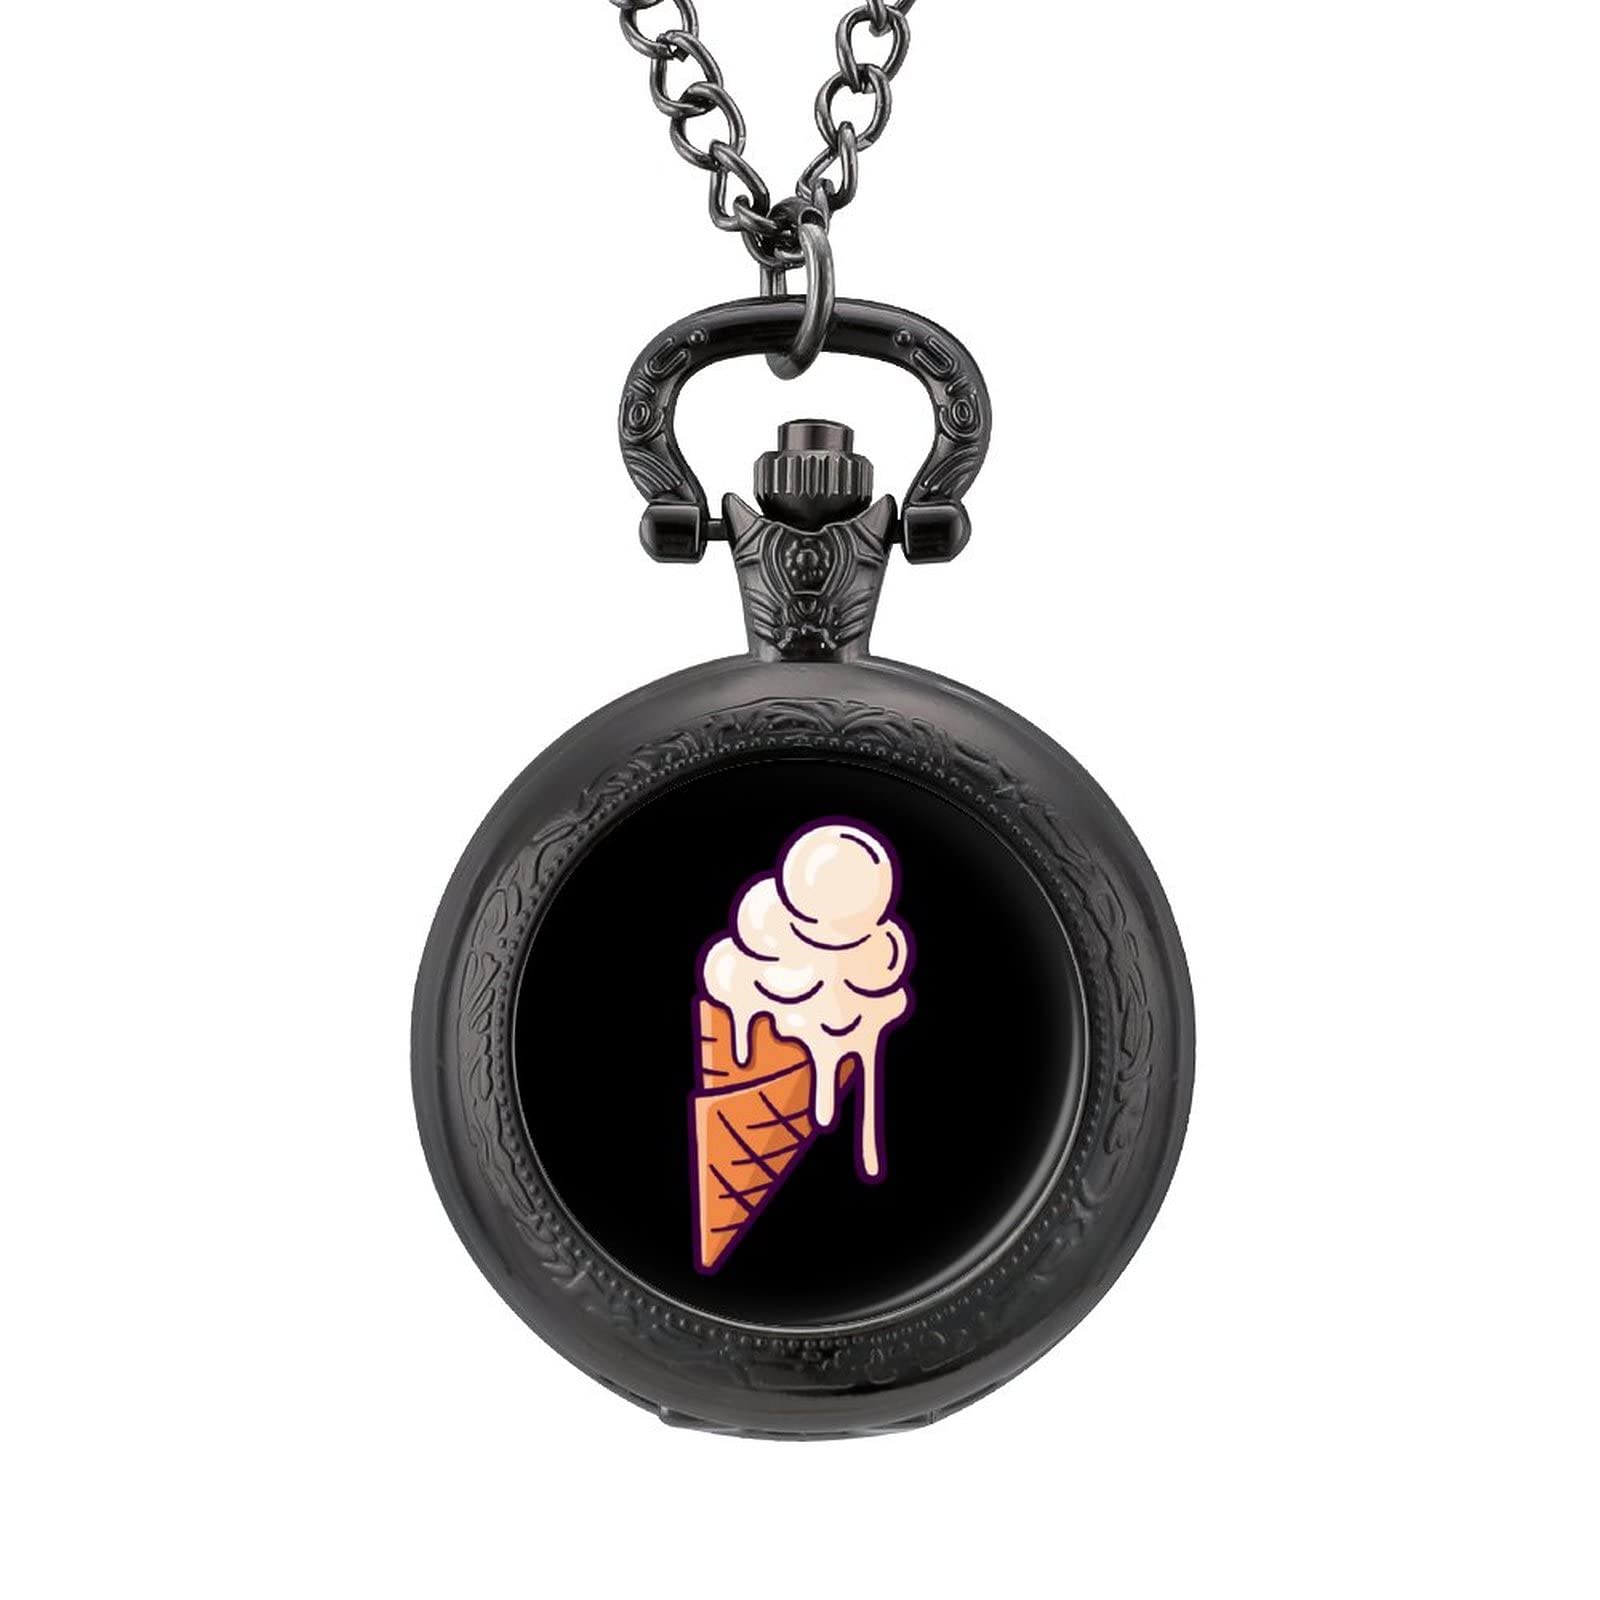 Melting Ice Cream Balls Personalized Pocket Watch Vintage Numerals Scale Quartz Watches Pendant Necklace with Chain